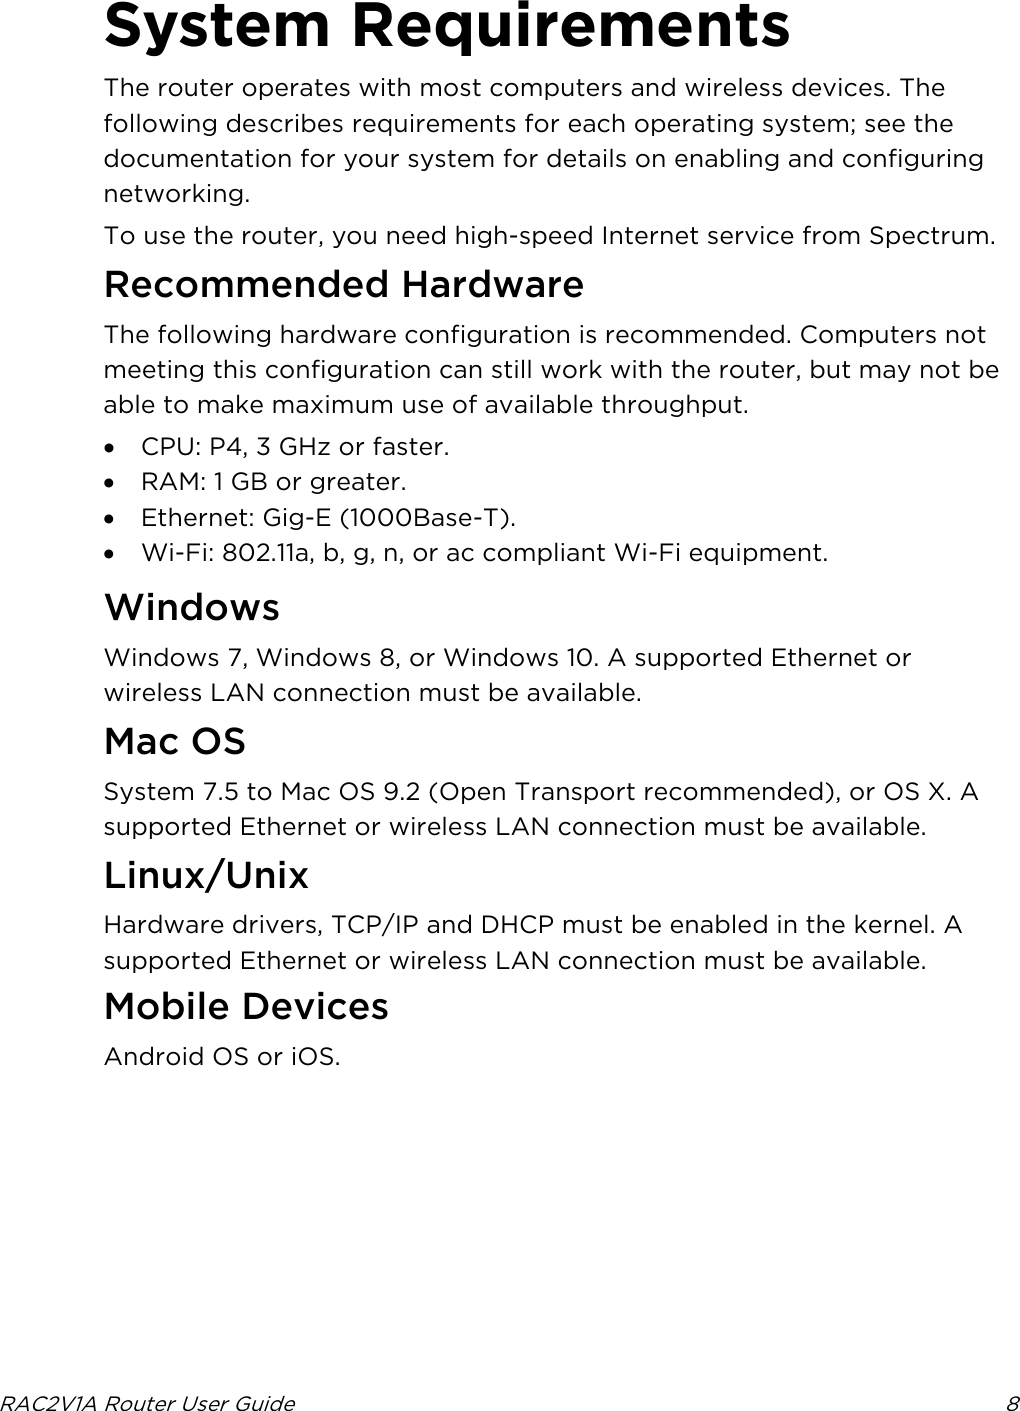  RAC2V1A Router User Guide  8  System Requirements The router operates with most computers and wireless devices. The following describes requirements for each operating system; see the documentation for your system for details on enabling and configuring networking. To use the router, you need high-speed Internet service from Spectrum.   Recommended Hardware The following hardware configuration is recommended. Computers not meeting this configuration can still work with the router, but may not be able to make maximum use of available throughput. • CPU: P4, 3 GHz or faster. • RAM: 1 GB or greater. • Ethernet: Gig-E (1000Base-T). • Wi-Fi: 802.11a, b, g, n, or ac compliant Wi-Fi equipment.   Windows Windows 7, Windows 8, or Windows 10. A supported Ethernet or wireless LAN connection must be available.   Mac OS System 7.5 to Mac OS 9.2 (Open Transport recommended), or OS X. A supported Ethernet or wireless LAN connection must be available.   Linux/Unix Hardware drivers, TCP/IP and DHCP must be enabled in the kernel. A supported Ethernet or wireless LAN connection must be available. Mobile Devices Android OS or iOS.  